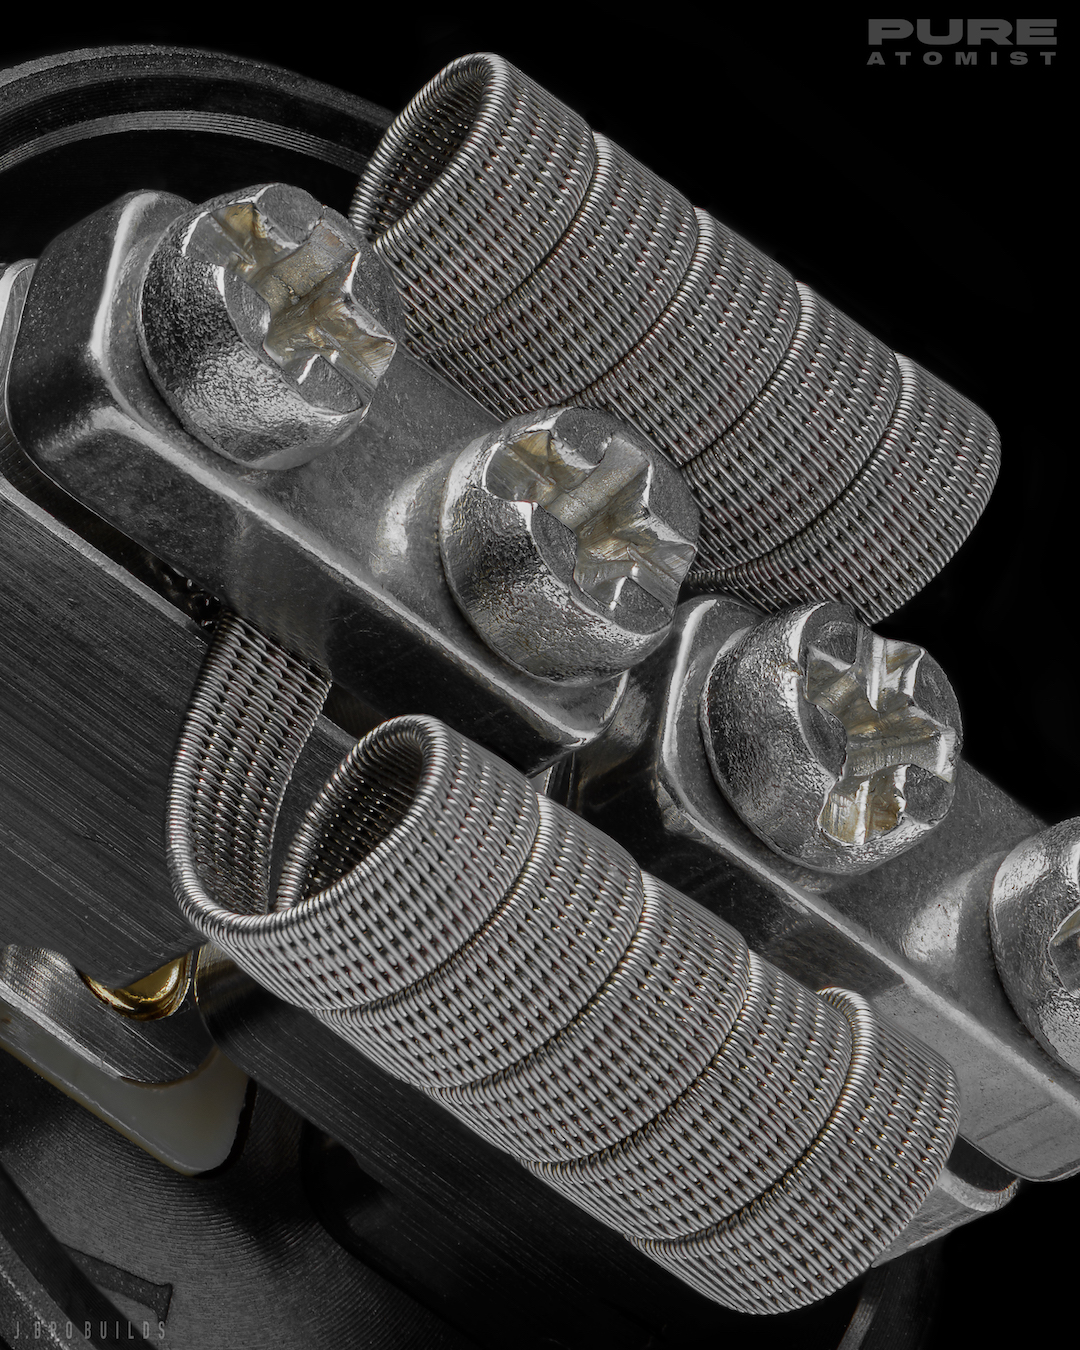 20170720-0158-Goon v1.5 Staggered Fused Clapton-0001-Stack-Edit.jpg